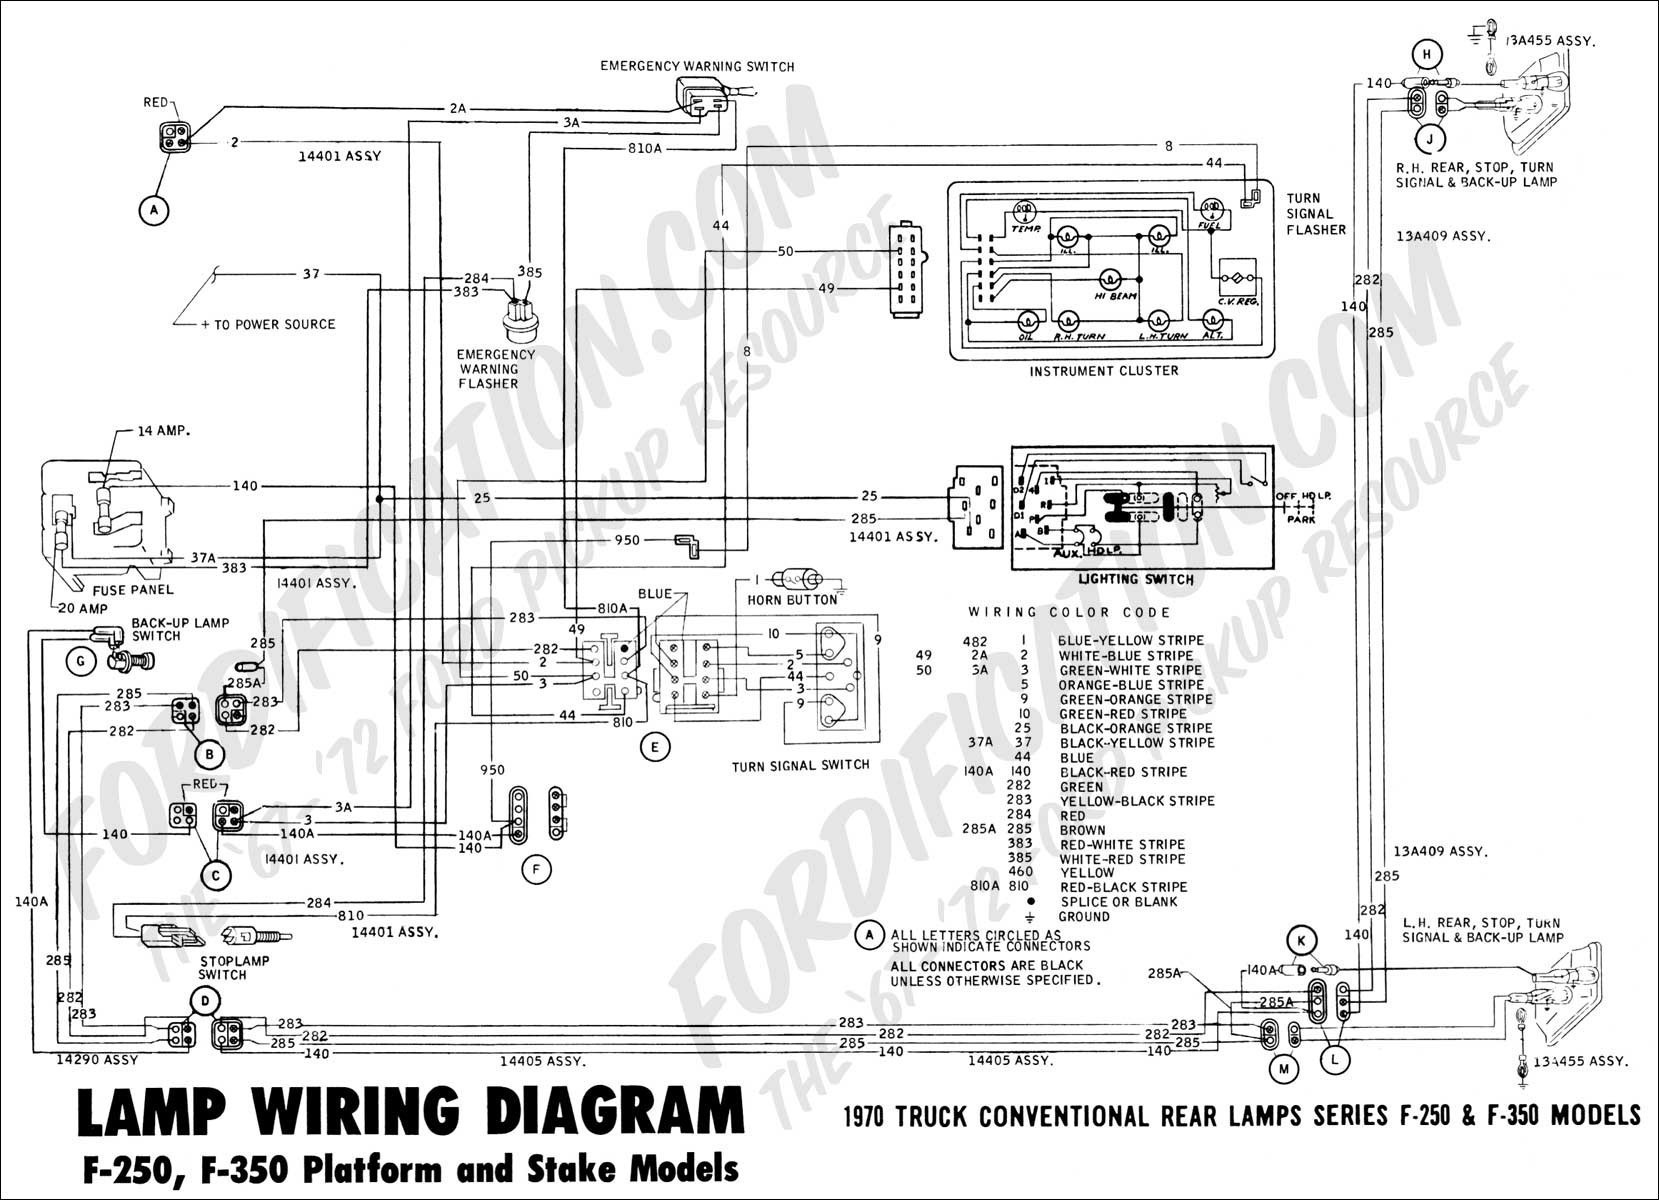 06 f150 wireing schematic trusted wiring diagram rh dafpods co 2011 Ford F 150 Tail Lights 2013 F 150 LED Tail Lights